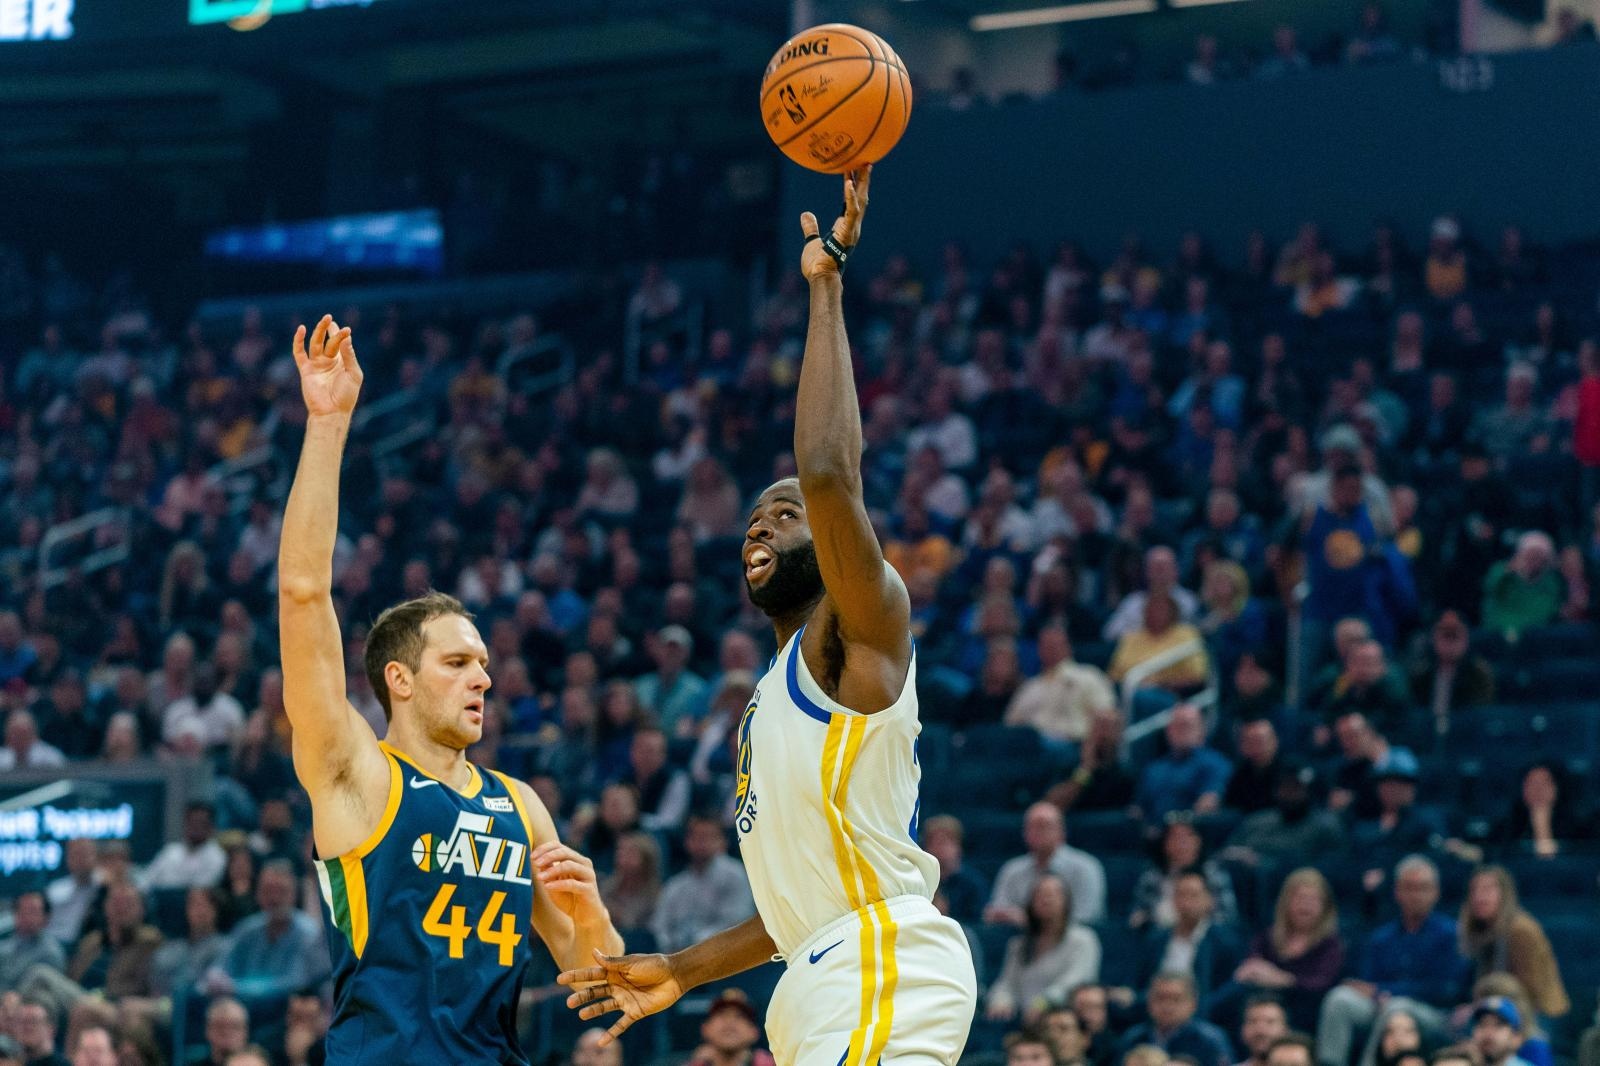 NBA: Utah Jazz at Golden State Warriors Nov 11, 2019; San Francisco, CA, USA; Golden State Warriors forward Draymond Green (23) is fouled by Utah Jazz forward Bojan Bogdanovic (44) during the during the first quarter at Chase Center. Mandatory Credit: Neville E. Guard-USA TODAY Sports Neville E. Guard